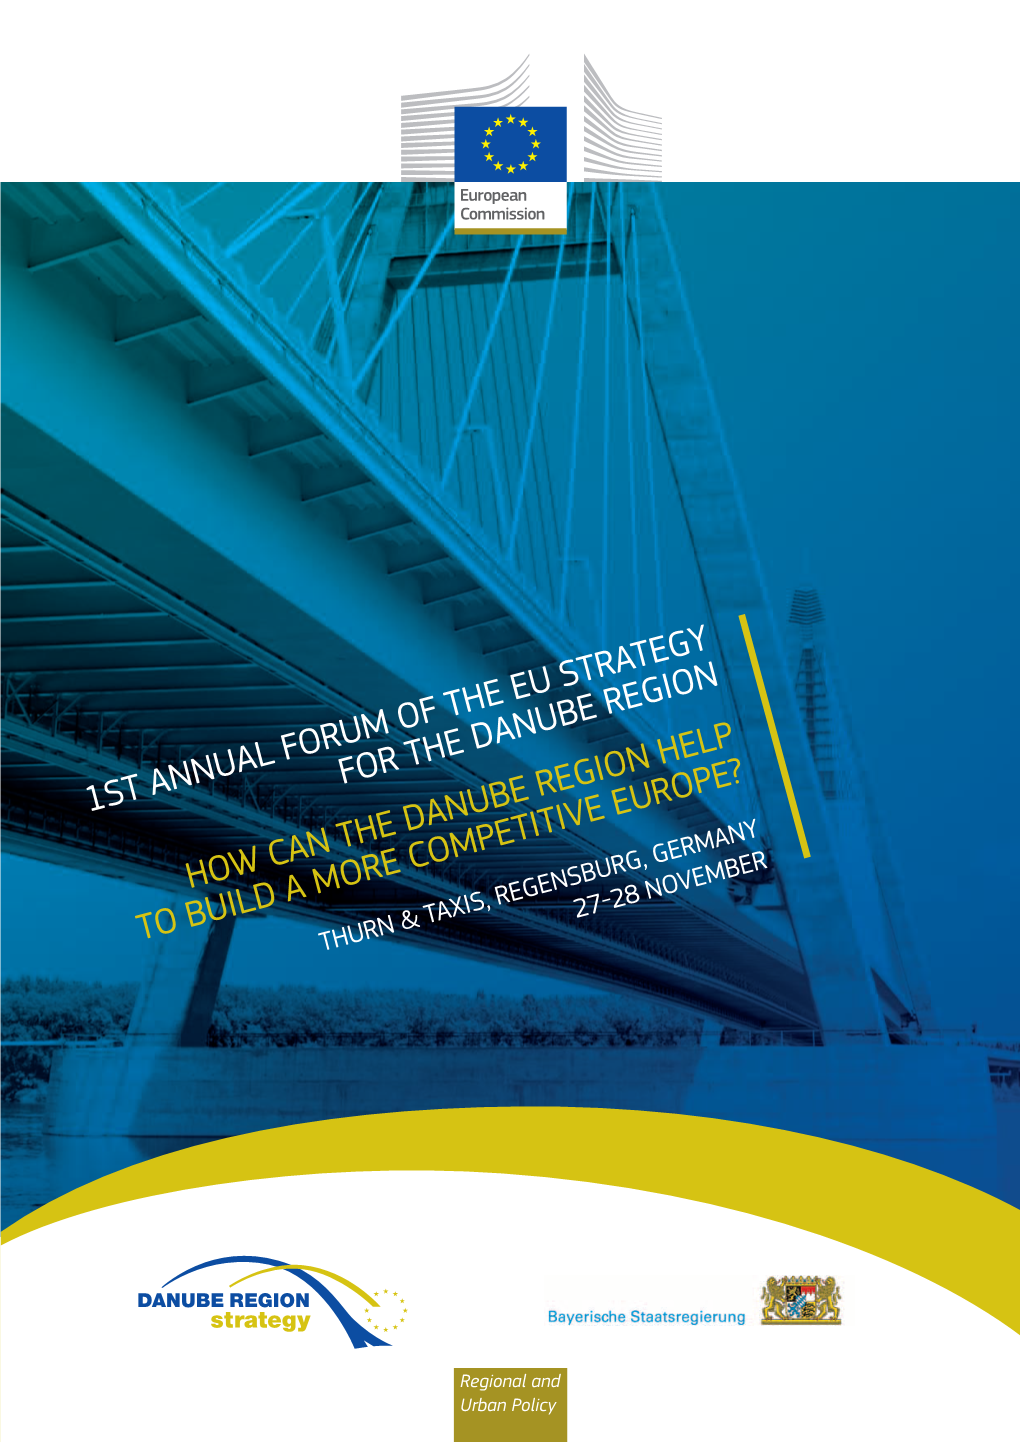 1St Annual Forum of the Eu Strategy for the Danube Region How Can The